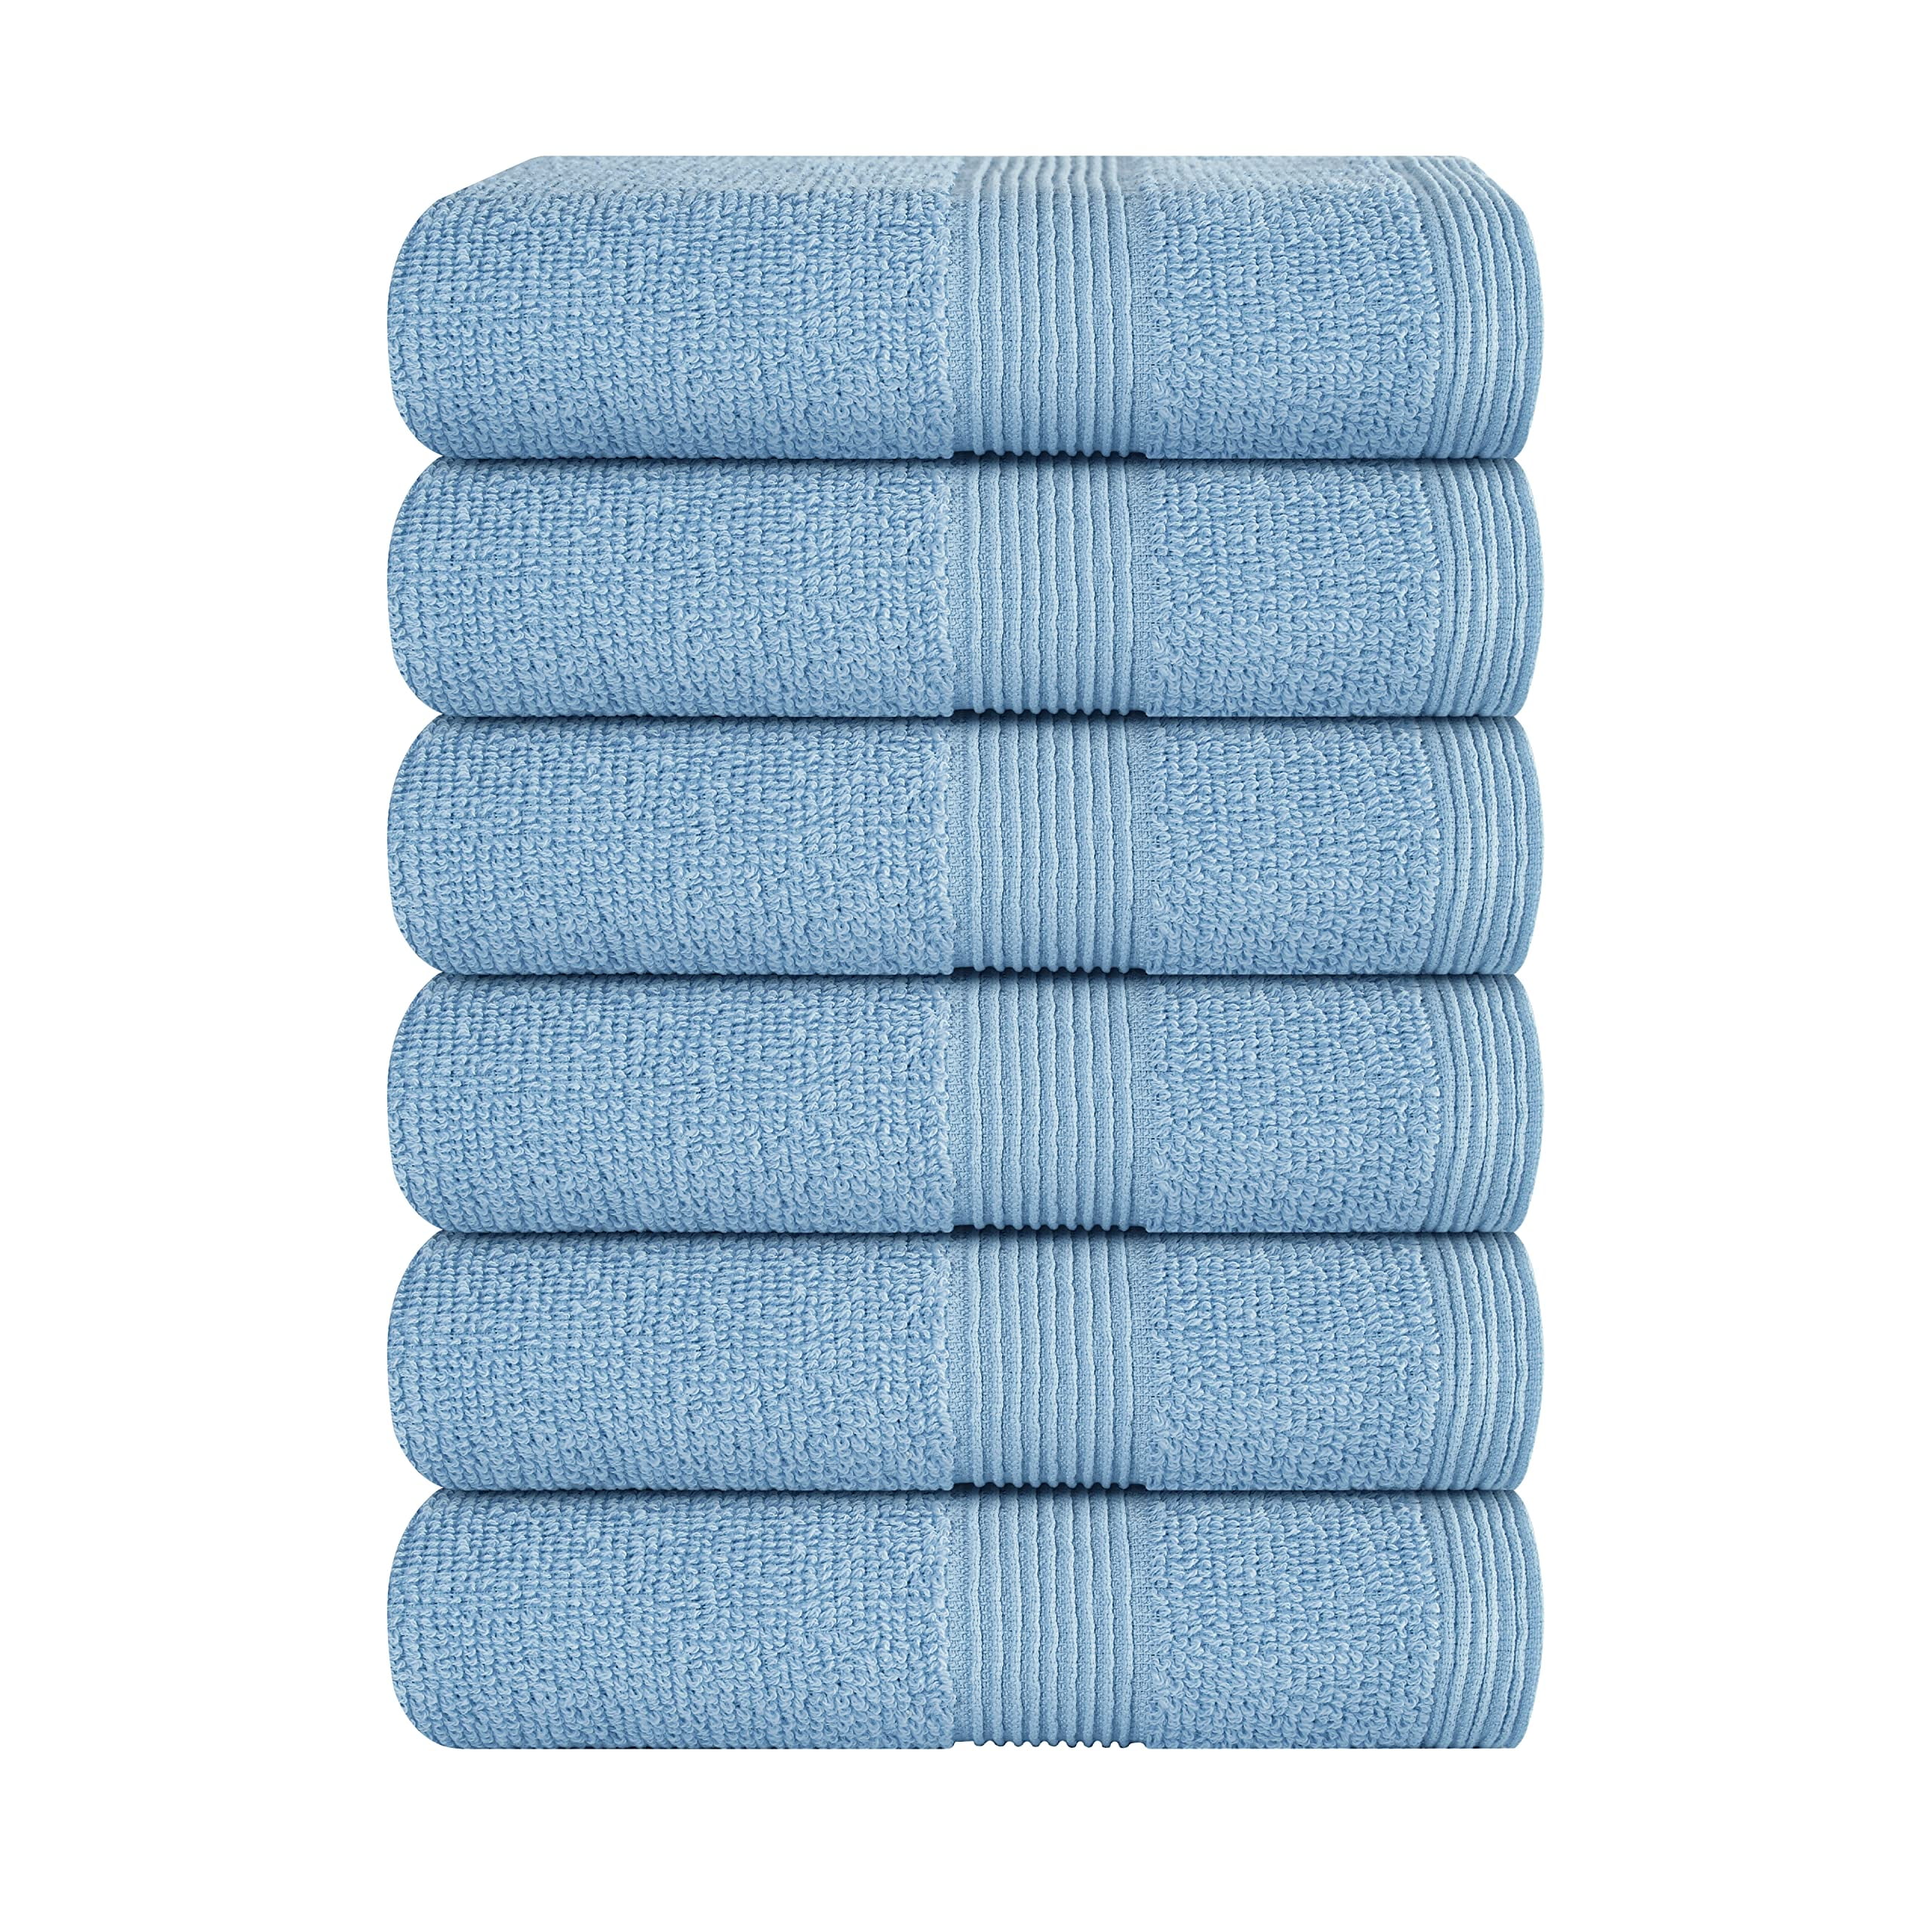 Softolle Premium 600 GSM Hand Towels –100% Combed Ring Spun Cotton Hand Towel - Pack of 6 Luxury Hand Towels - Highly Absorbent and Ultra Soft 16 x